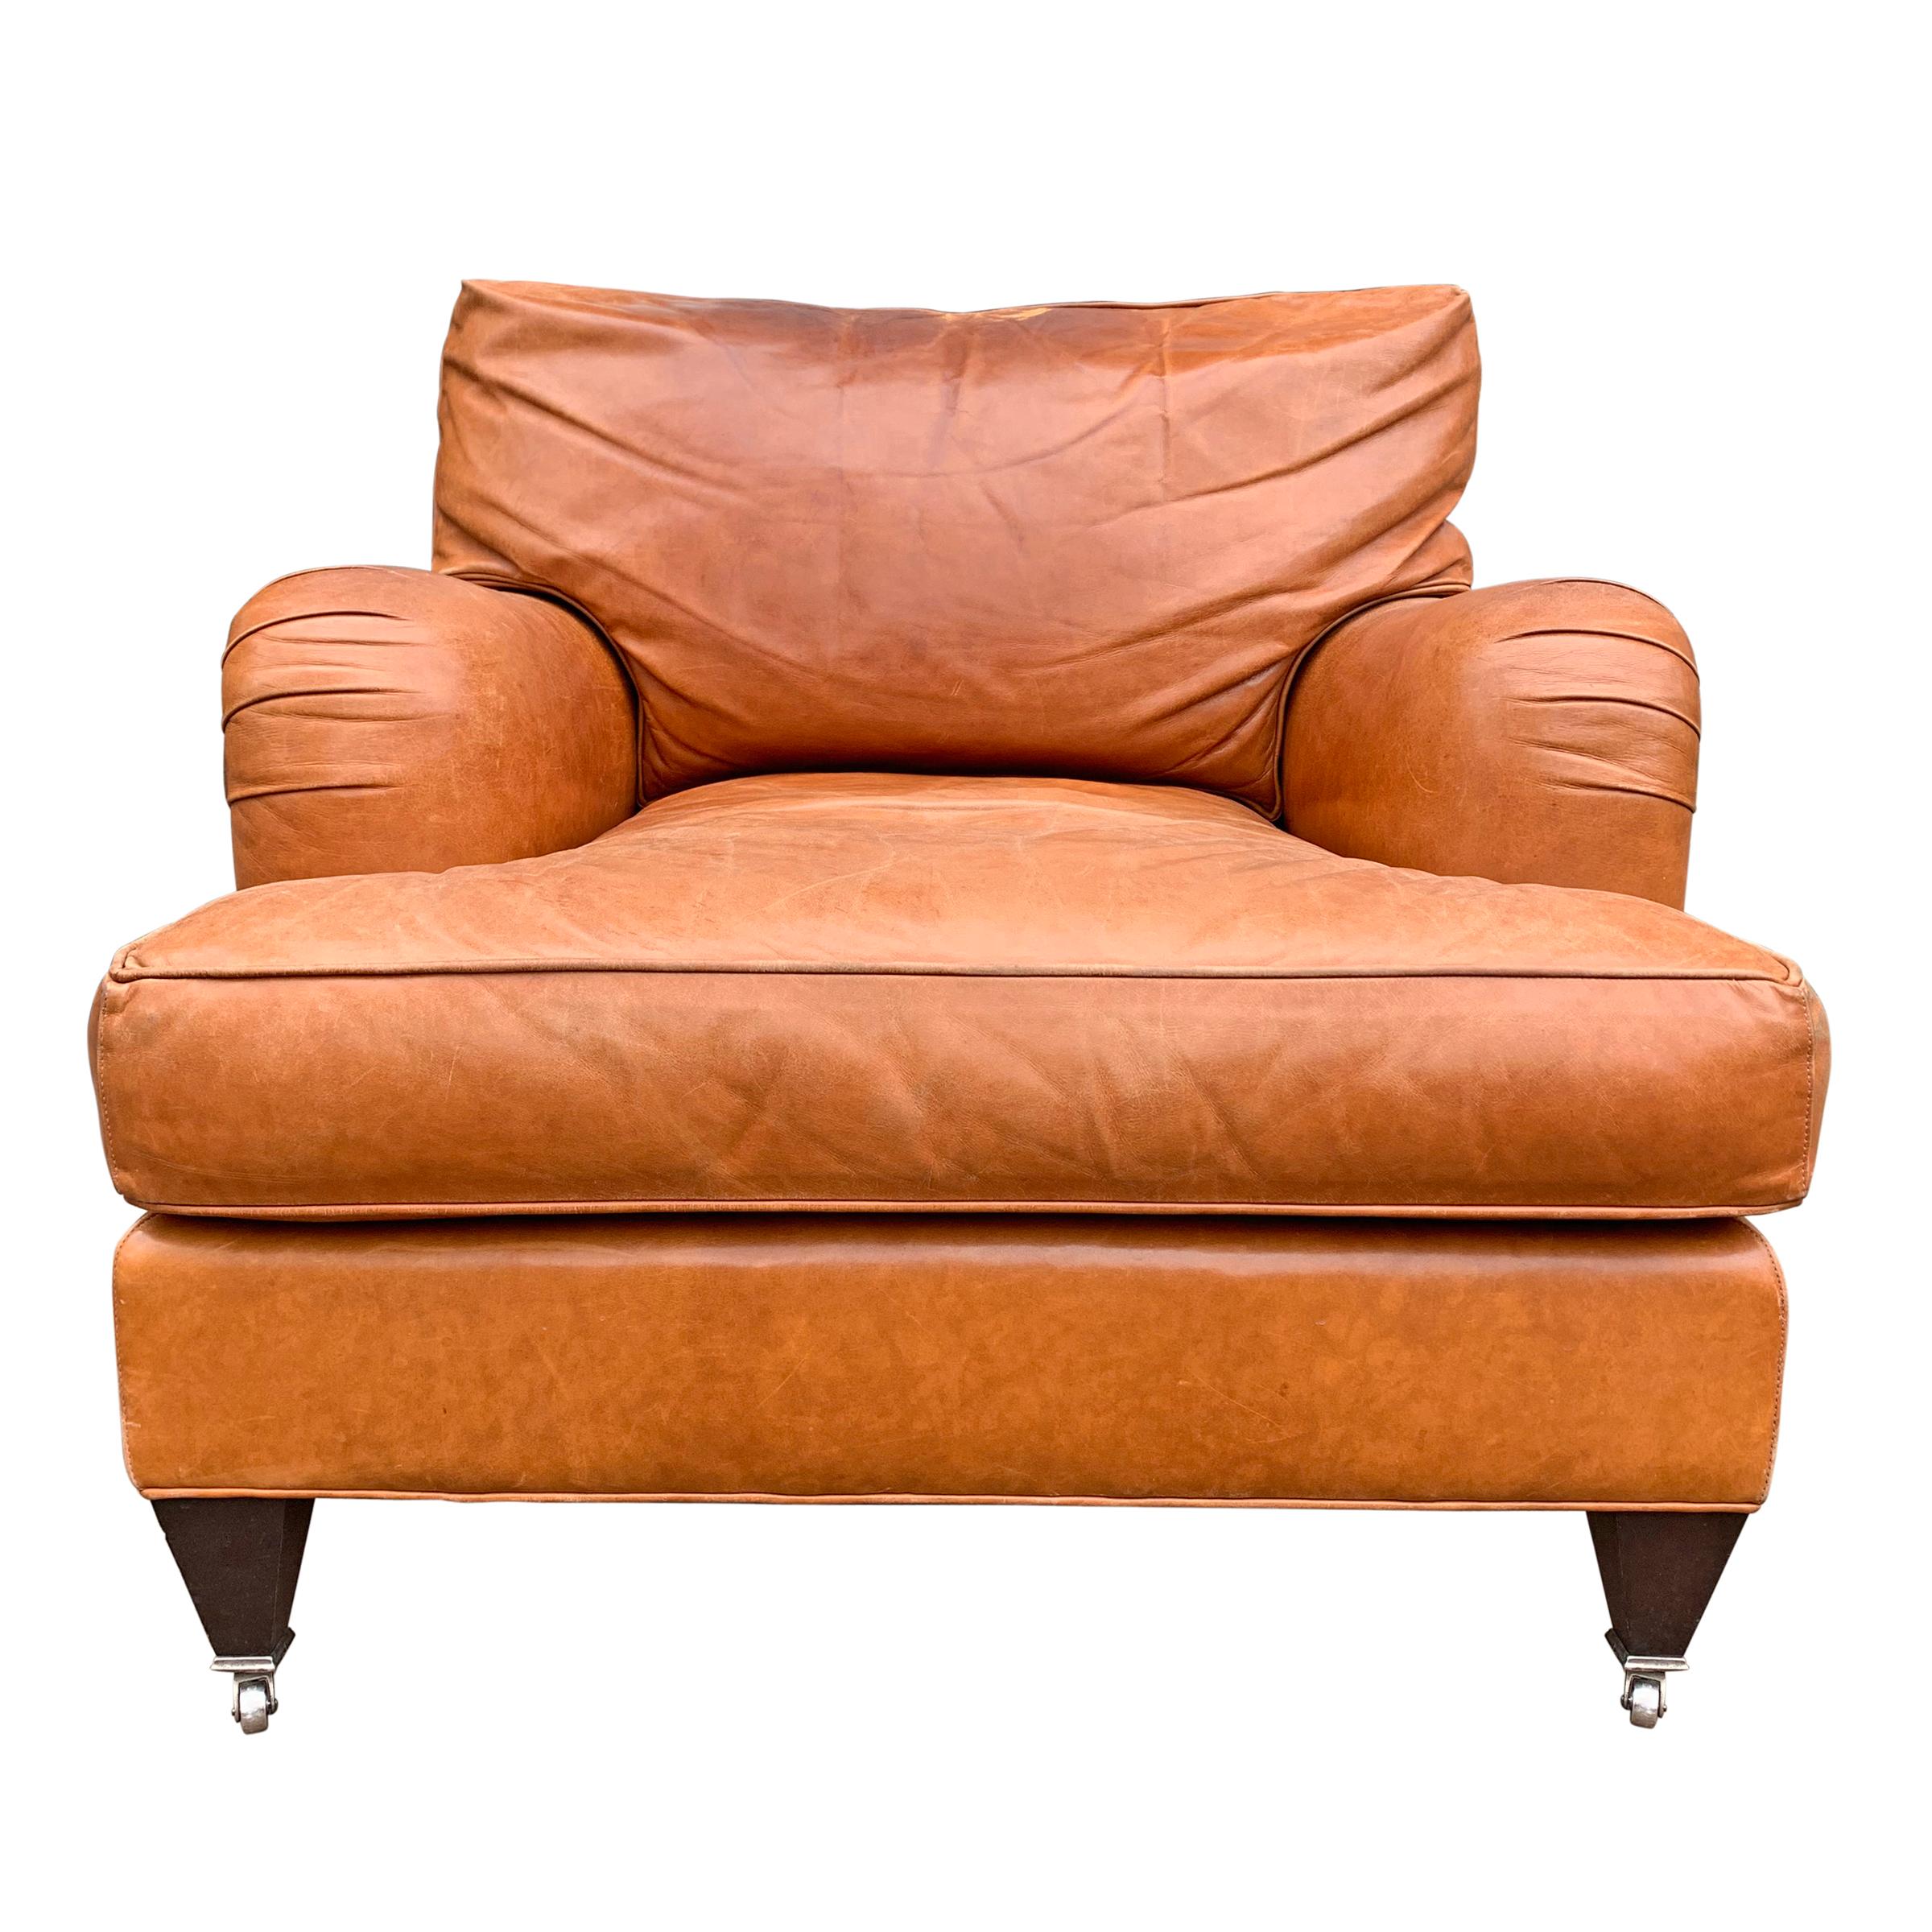 A crazy comfortable English roll armchair upholstered in a super soft coach leather with a down filled back cushion and a down wrapped foam seat cushion, with short tapered square legs ending in casters on the front.